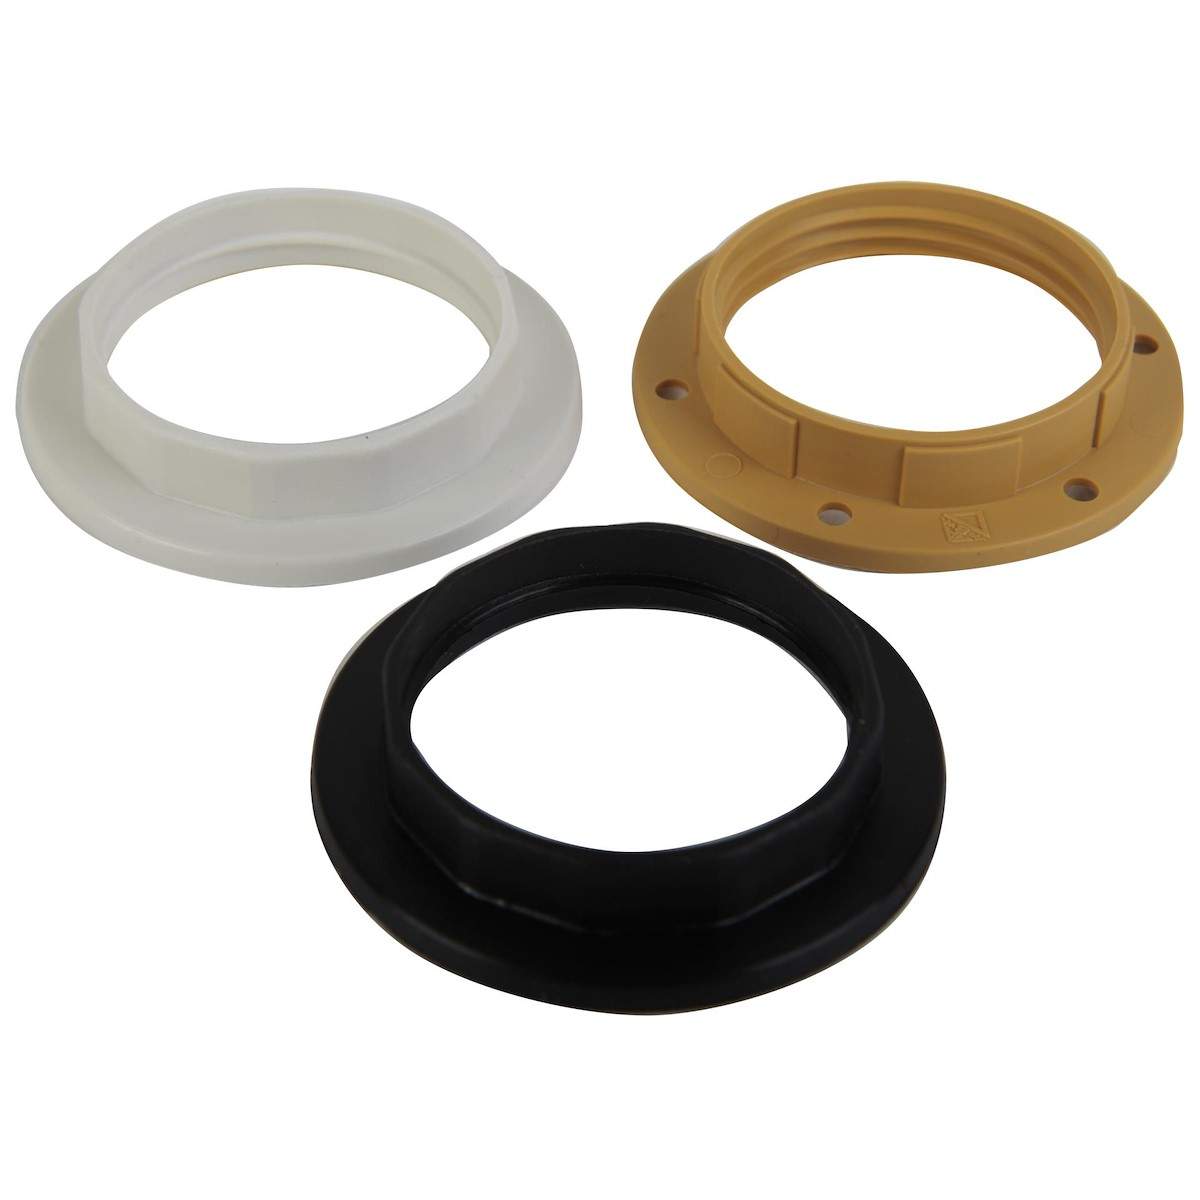 E27 mounting ring, from 40.6 to 42mm, white black and gold